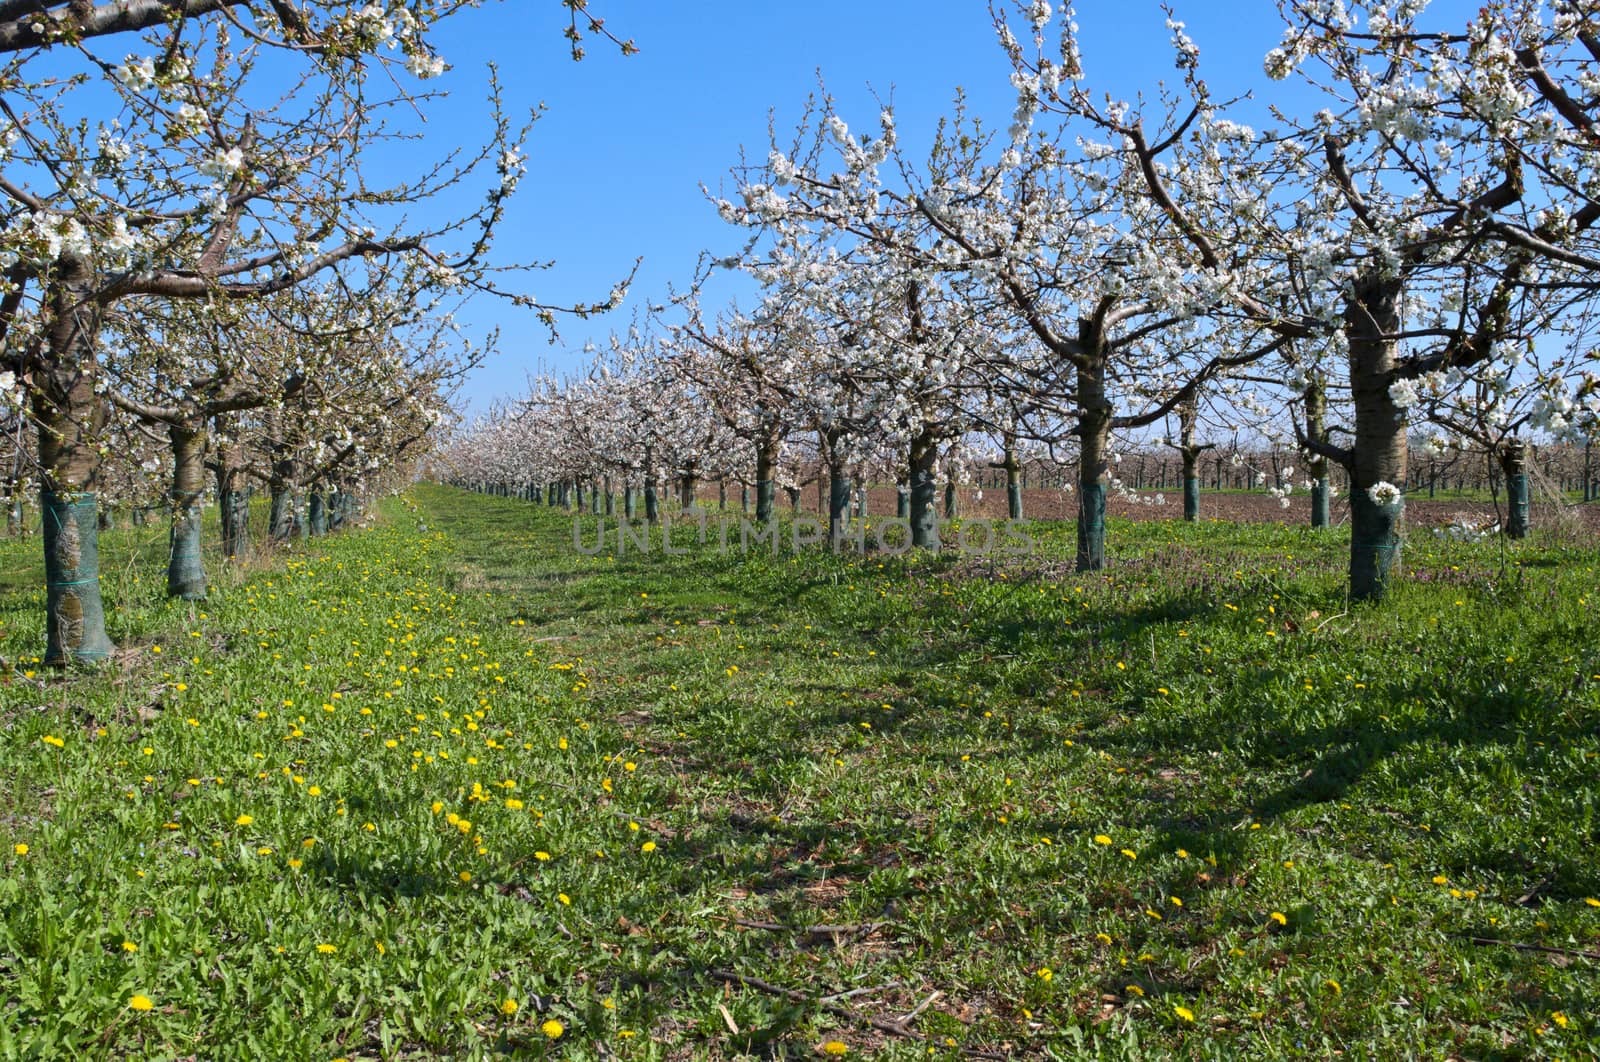 Peach trees blooming in orchard by sheriffkule